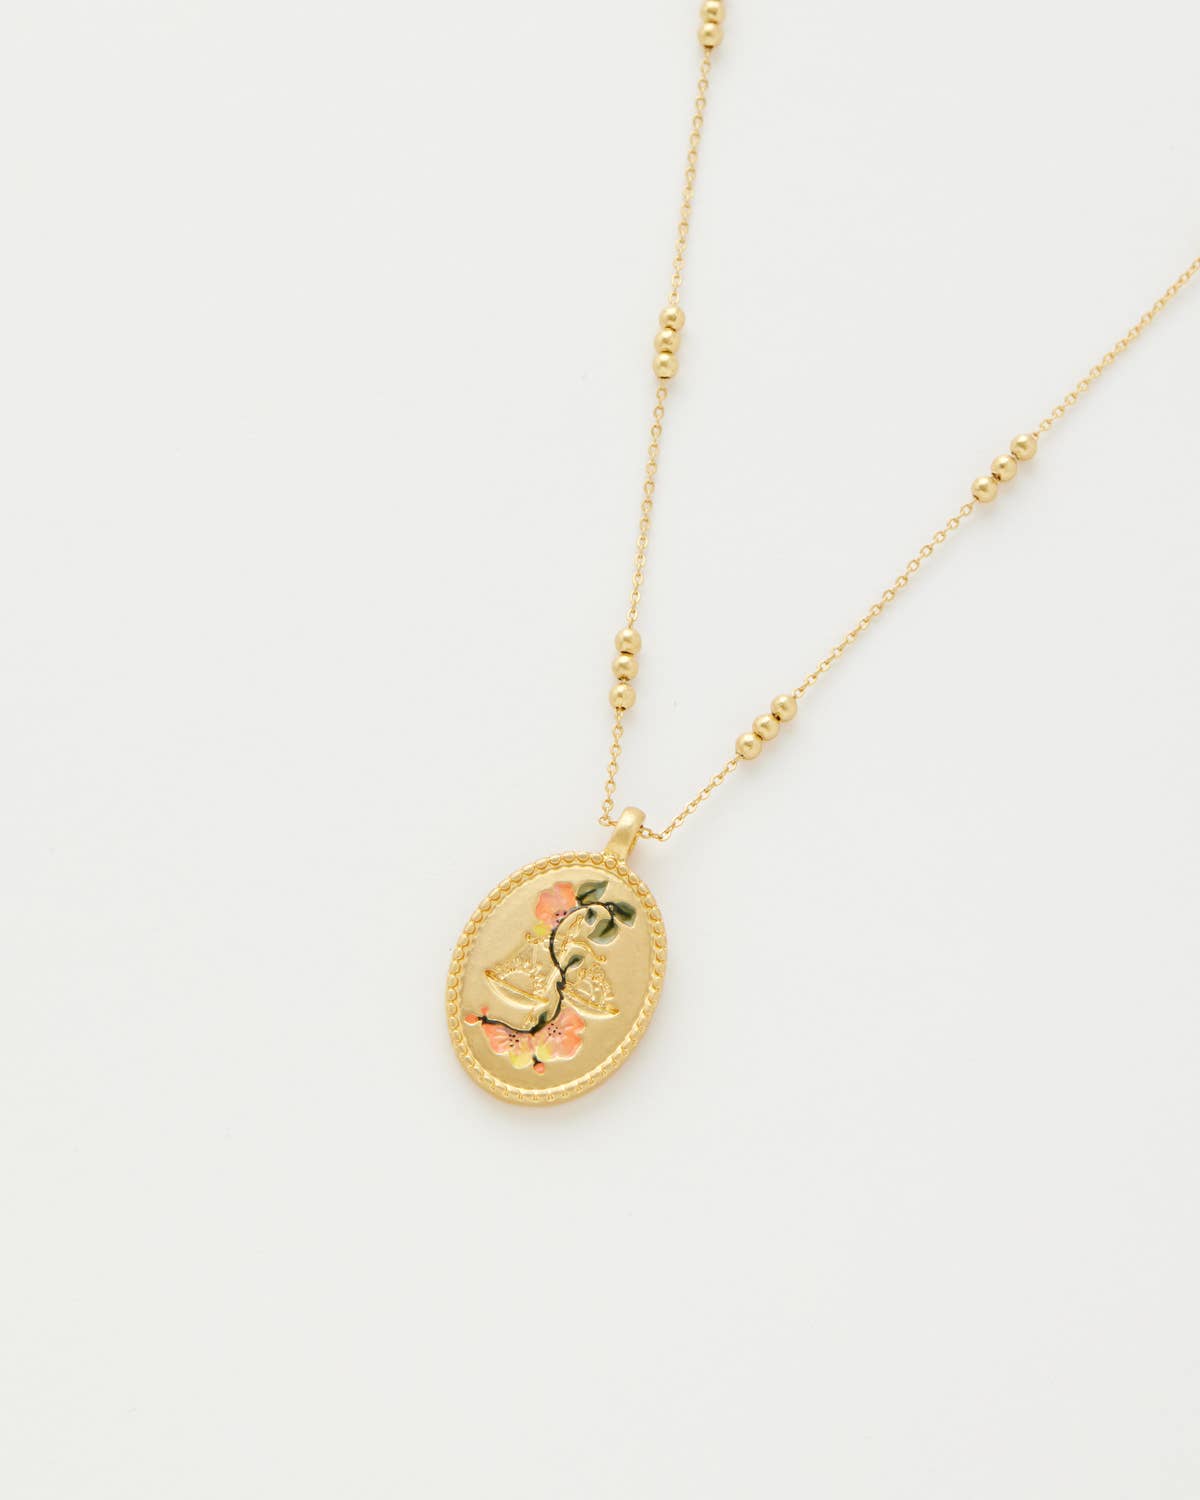 Zodiac Necklace - Libra - Out of the Blue